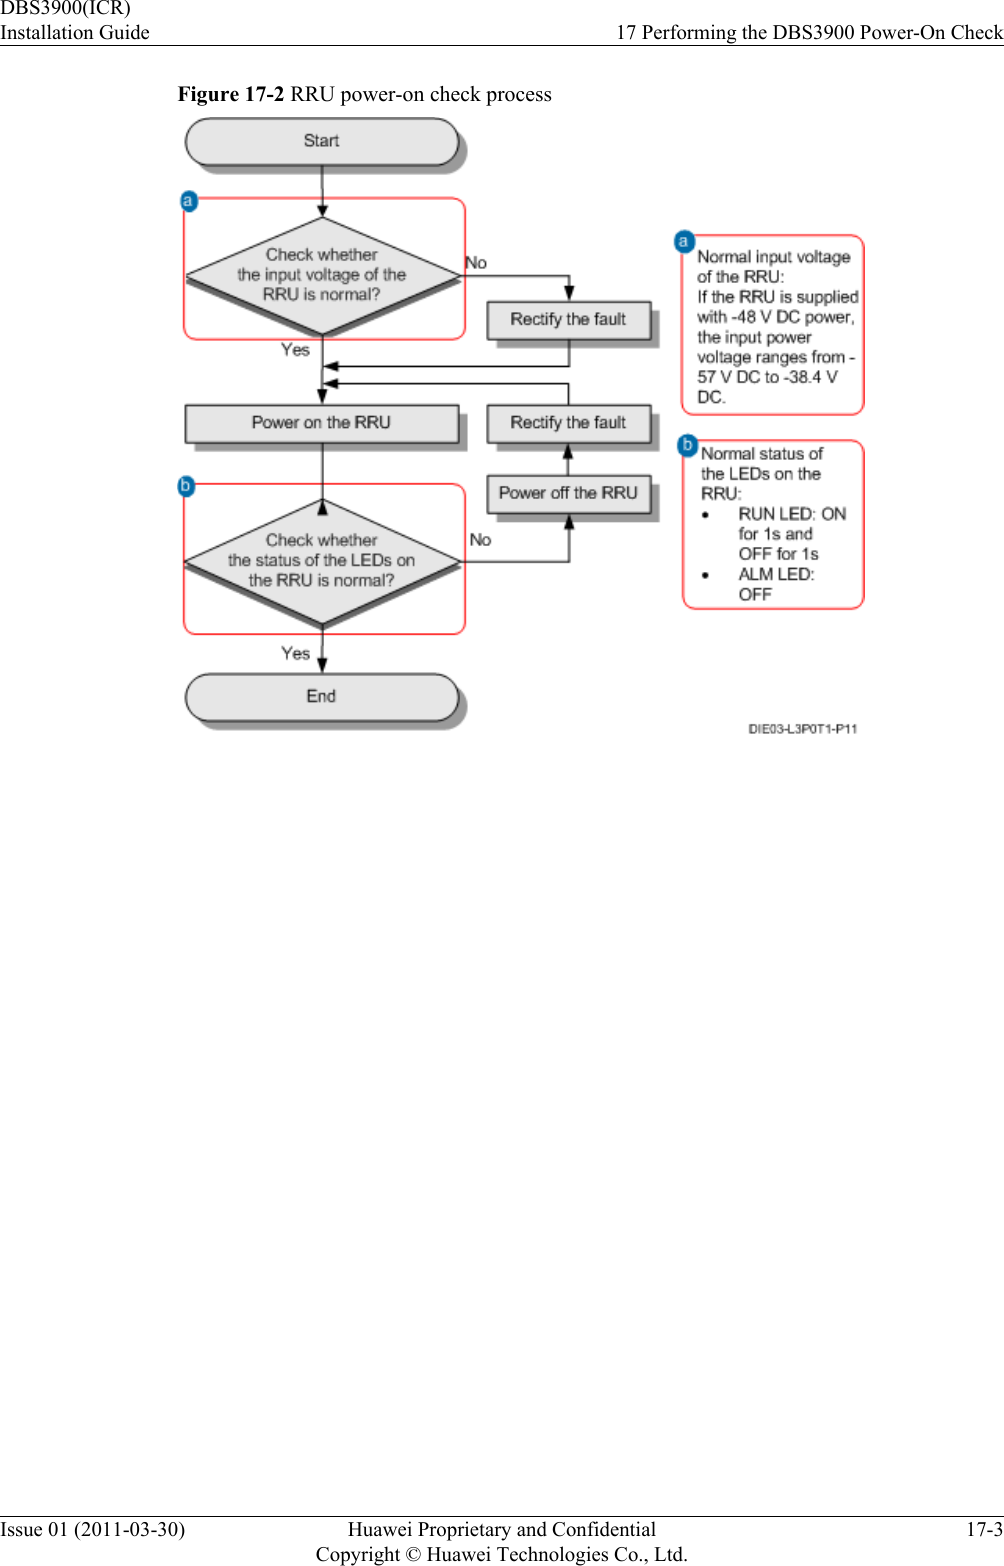 Figure 17-2 RRU power-on check processDBS3900(ICR)Installation Guide 17 Performing the DBS3900 Power-On CheckIssue 01 (2011-03-30) Huawei Proprietary and ConfidentialCopyright © Huawei Technologies Co., Ltd.17-3